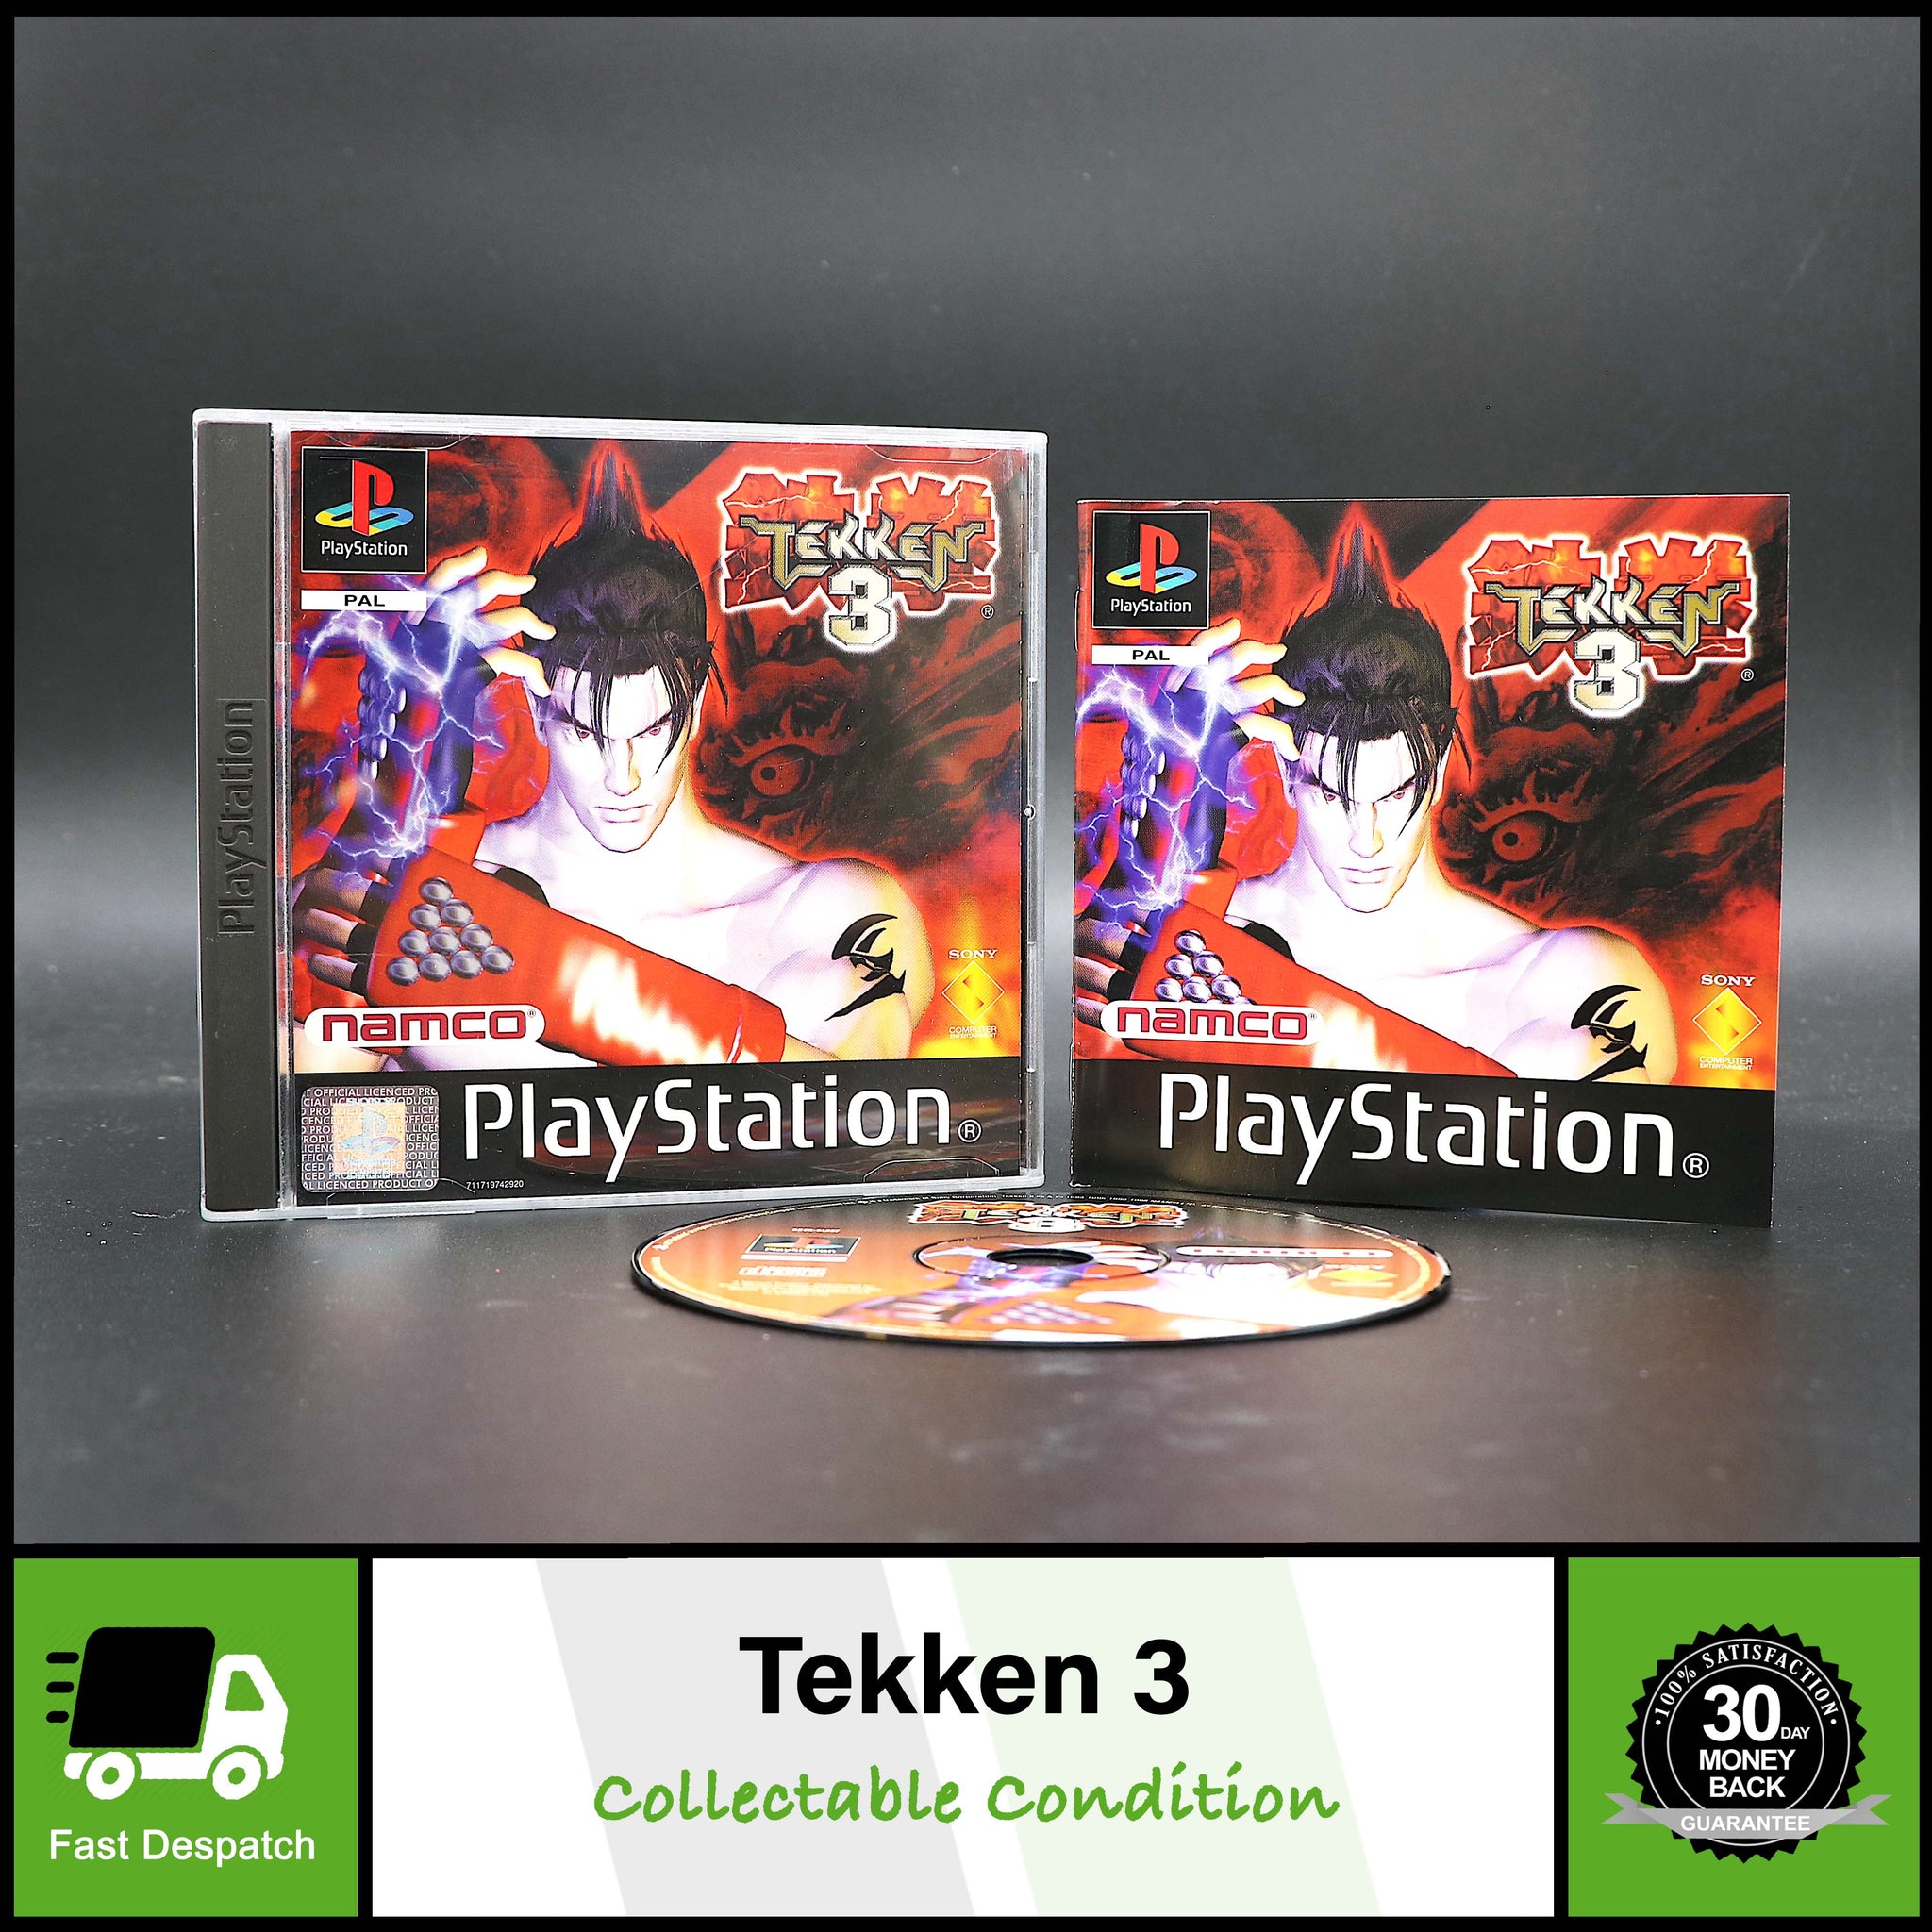 Tekken 3 | Black Label |PlayStation PS1 PSOne Game | Collectable Condition